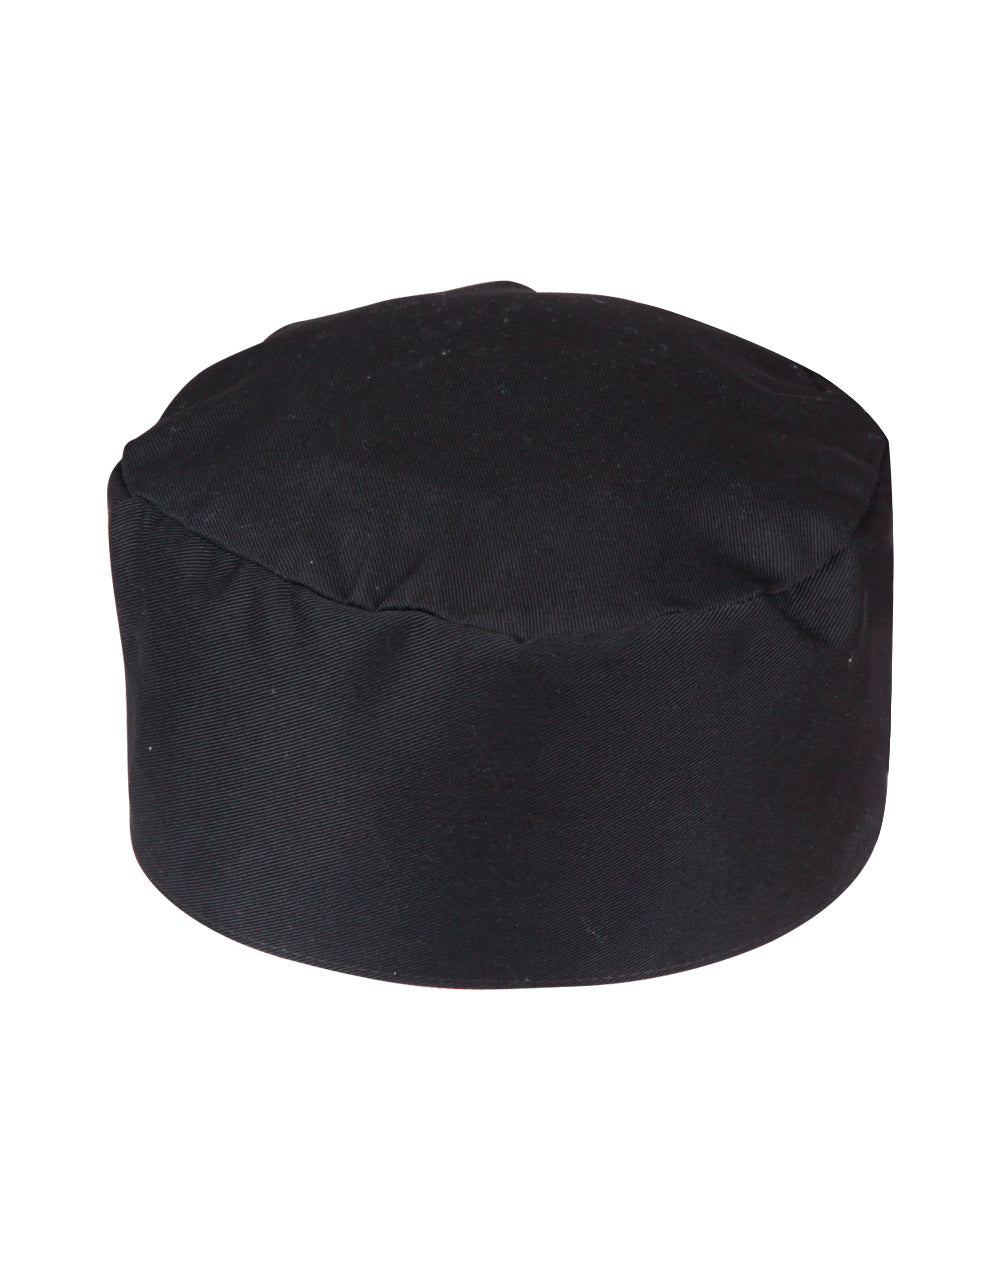 Chefs Cap - made by AIW